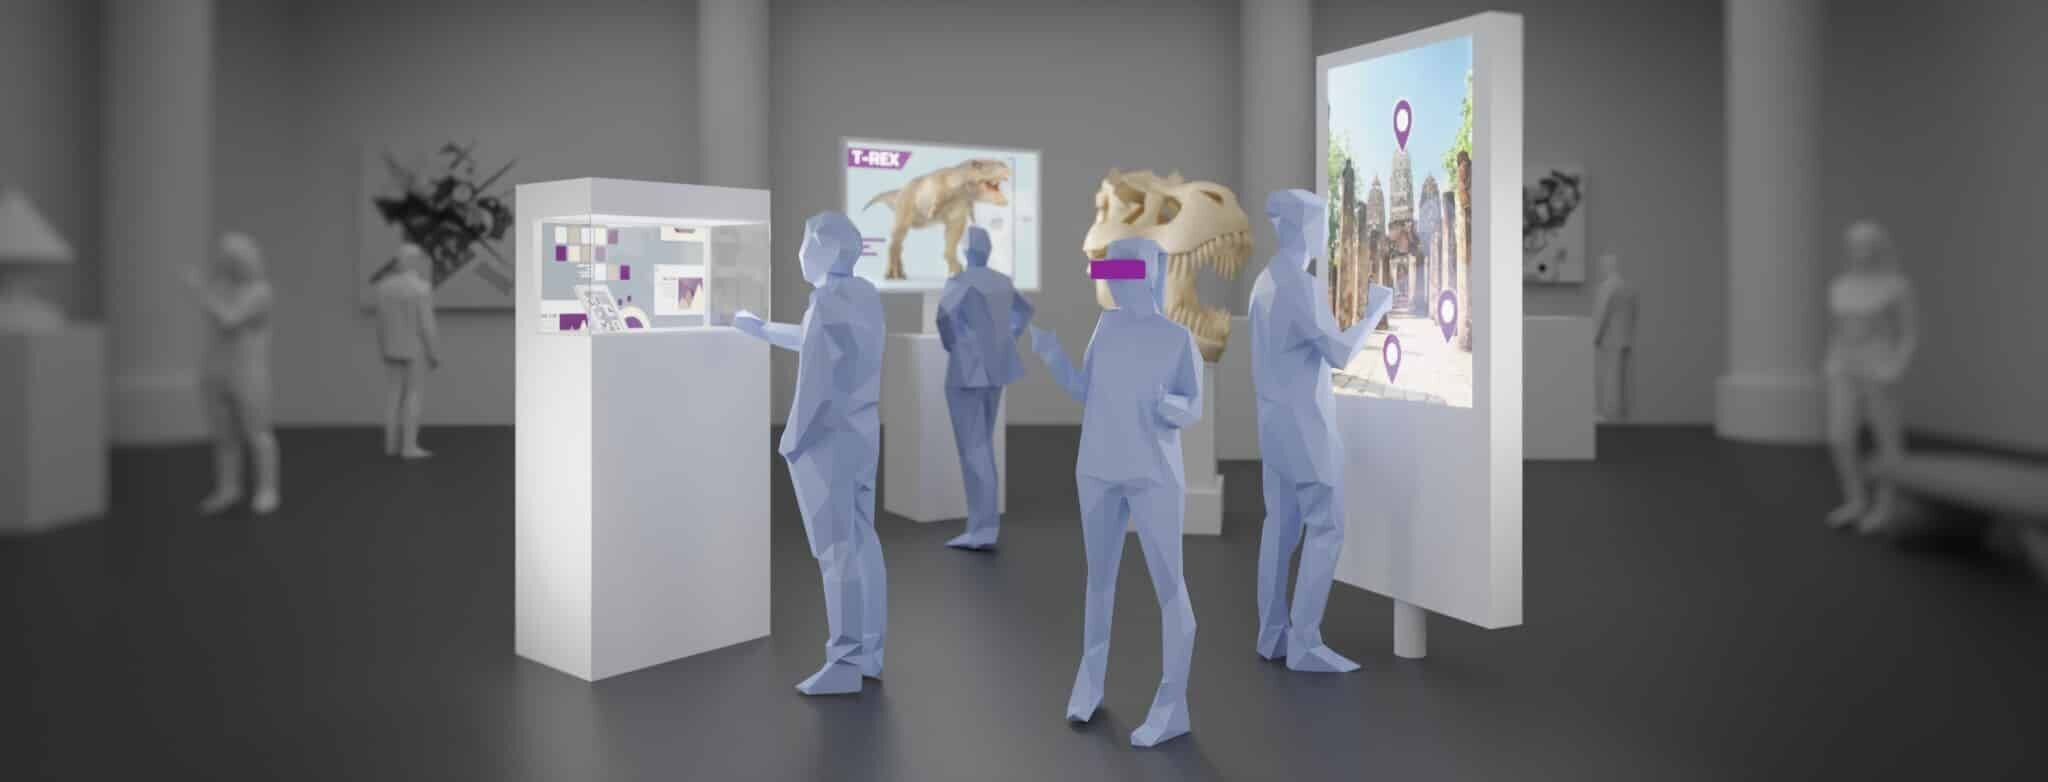 interactive exhibitions and digital museums